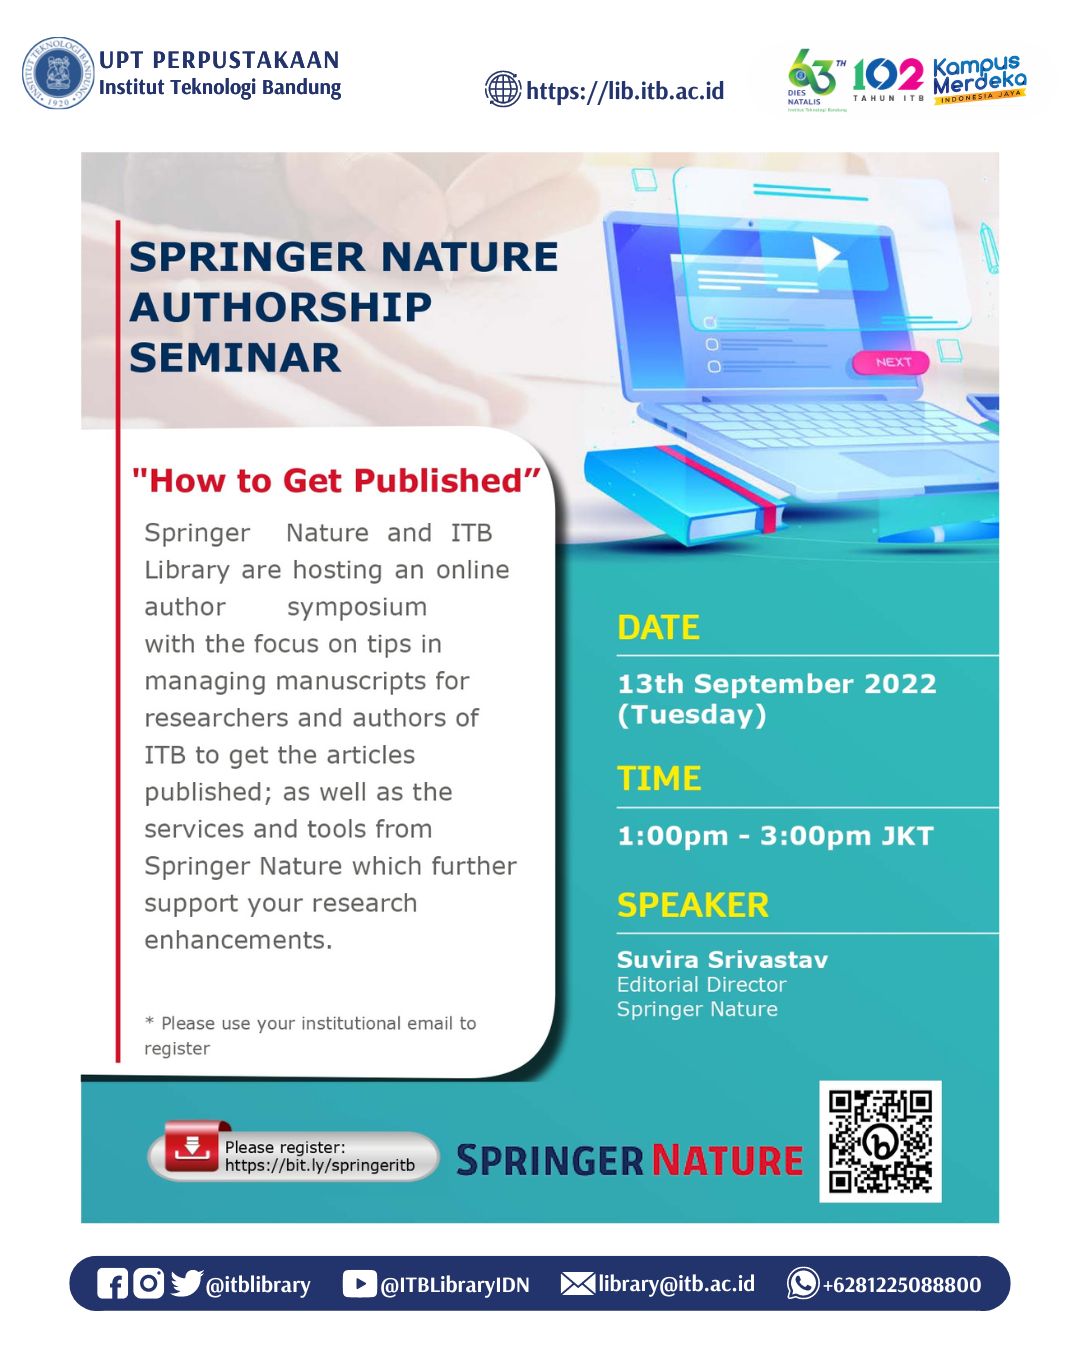 Springer Nature Authorship Seminar “How to Get Published”